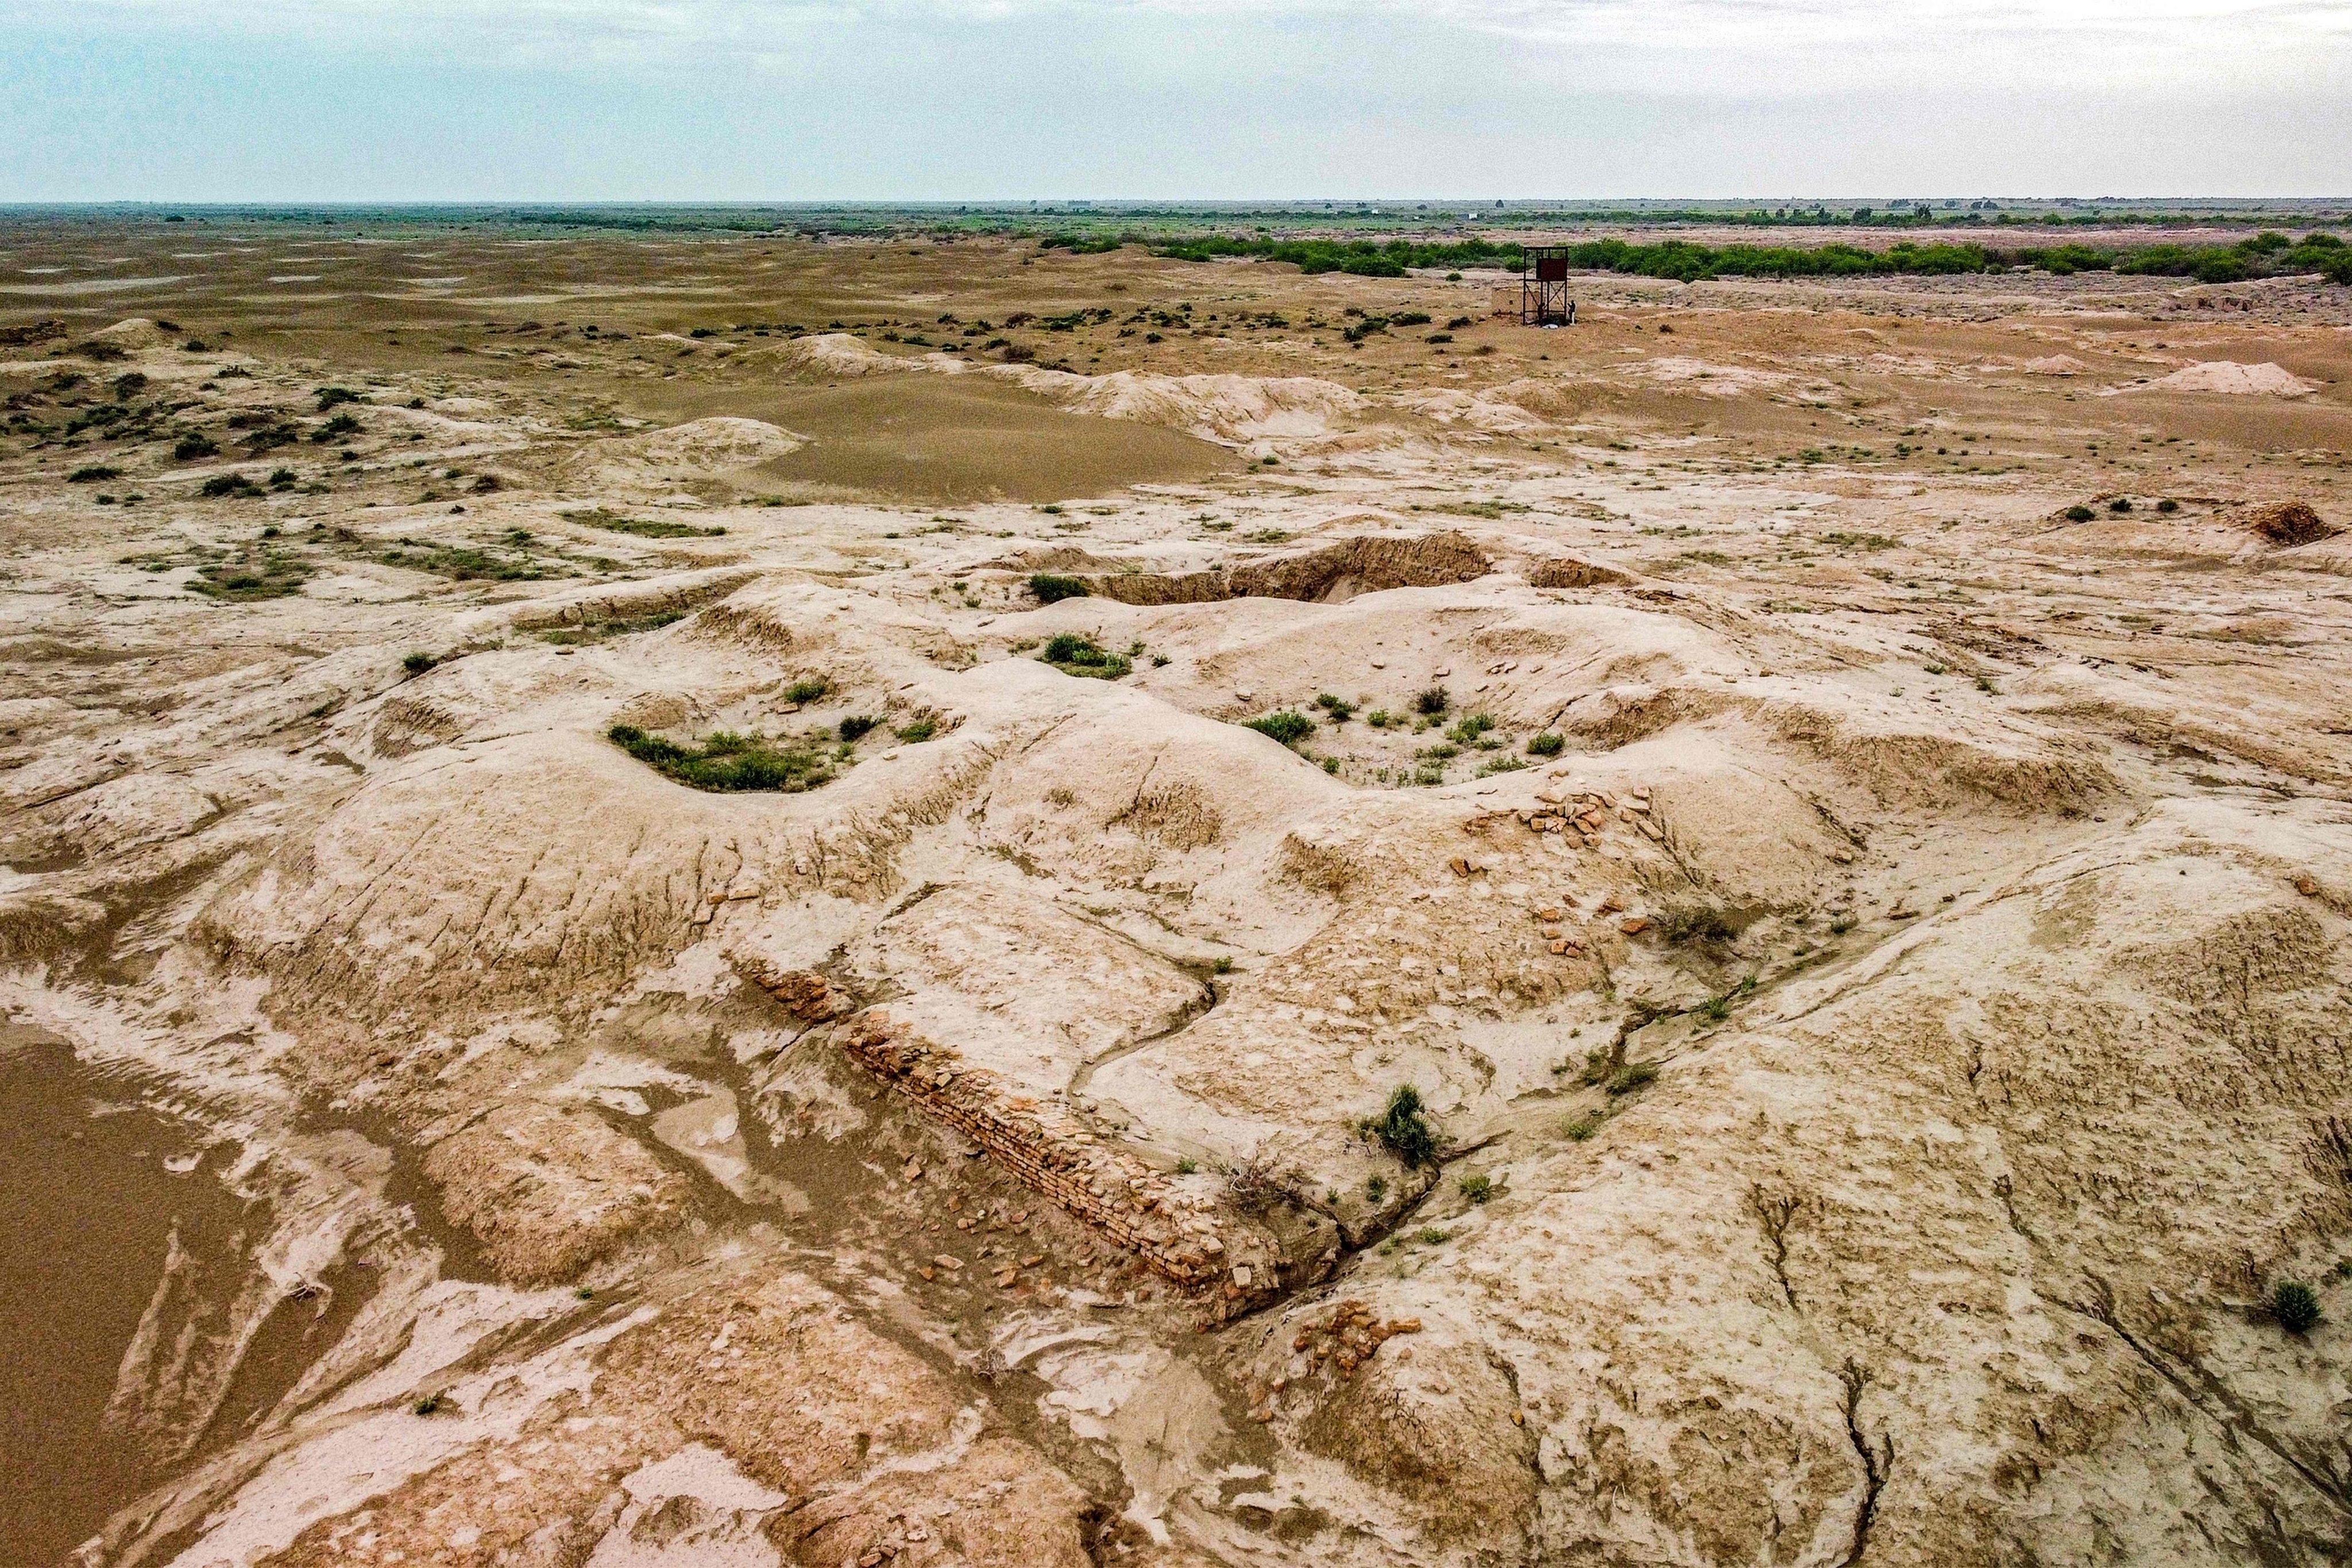 The Sumerian ruins of Umm al-Aqarib, “the Mother of Scorpions”, in the southern desert province of Dhi Qar, Iraq. Photo: AFP